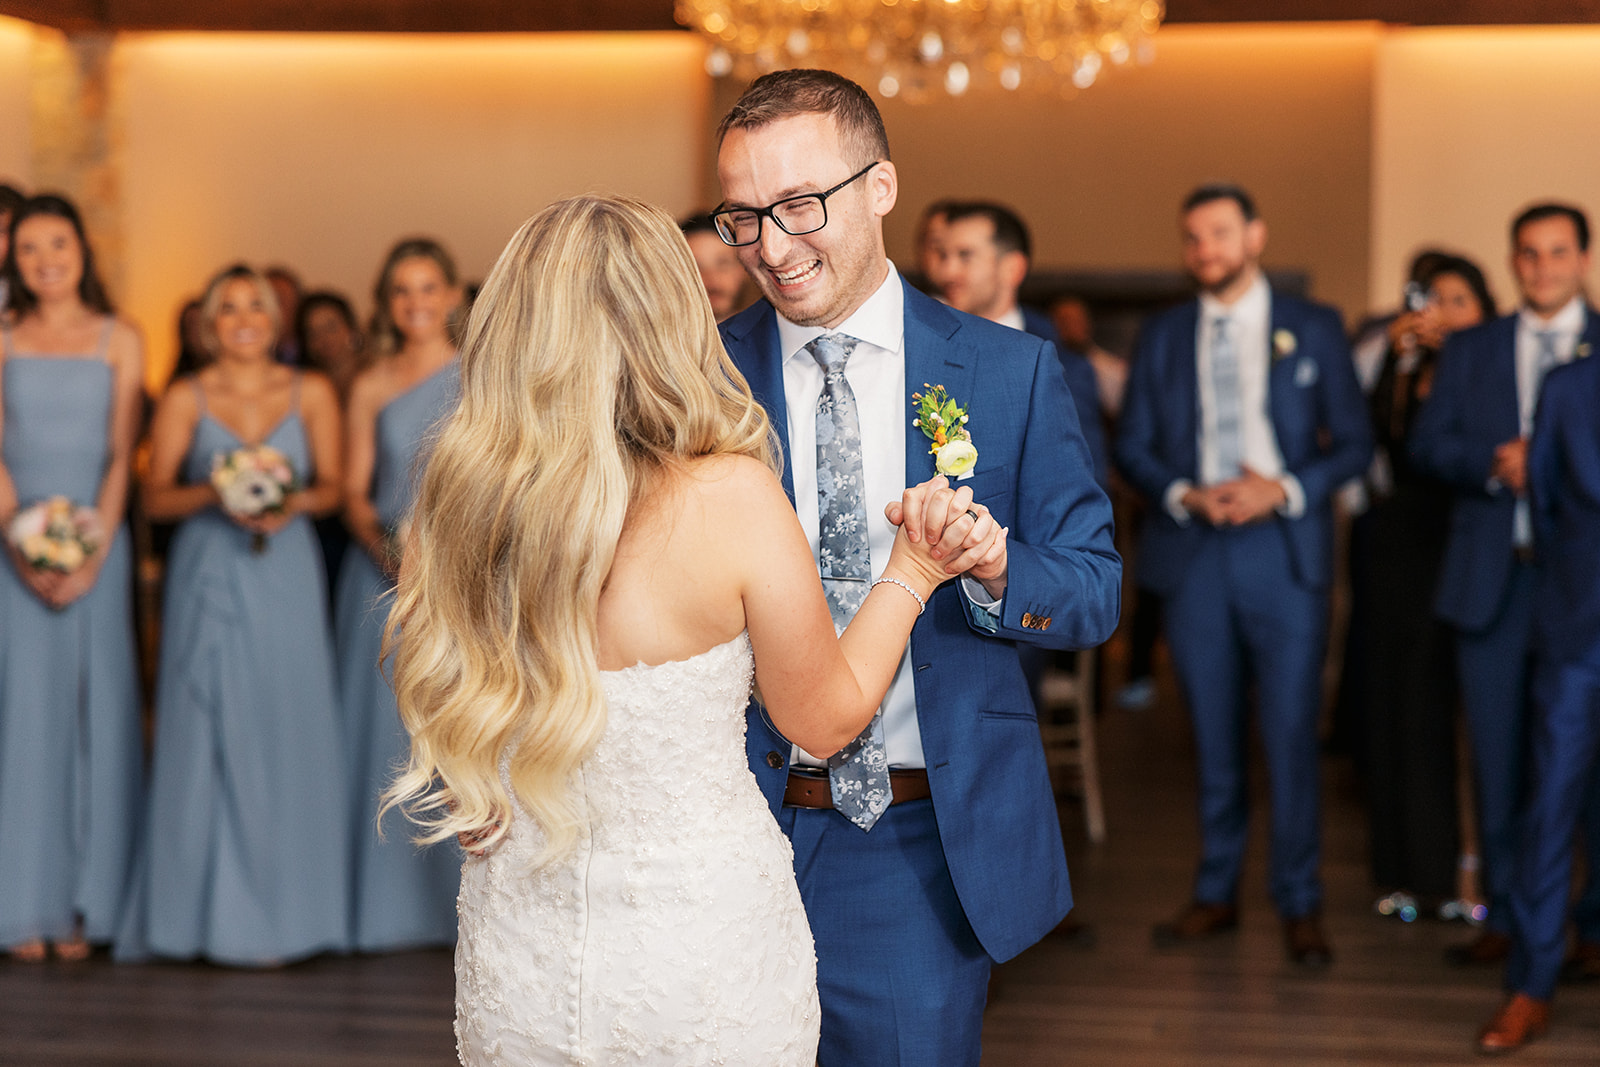 Newlyweds laugh and smile while dancing for the first time surrounded by their guests at their The Reserve At Perona Farms wedding reception